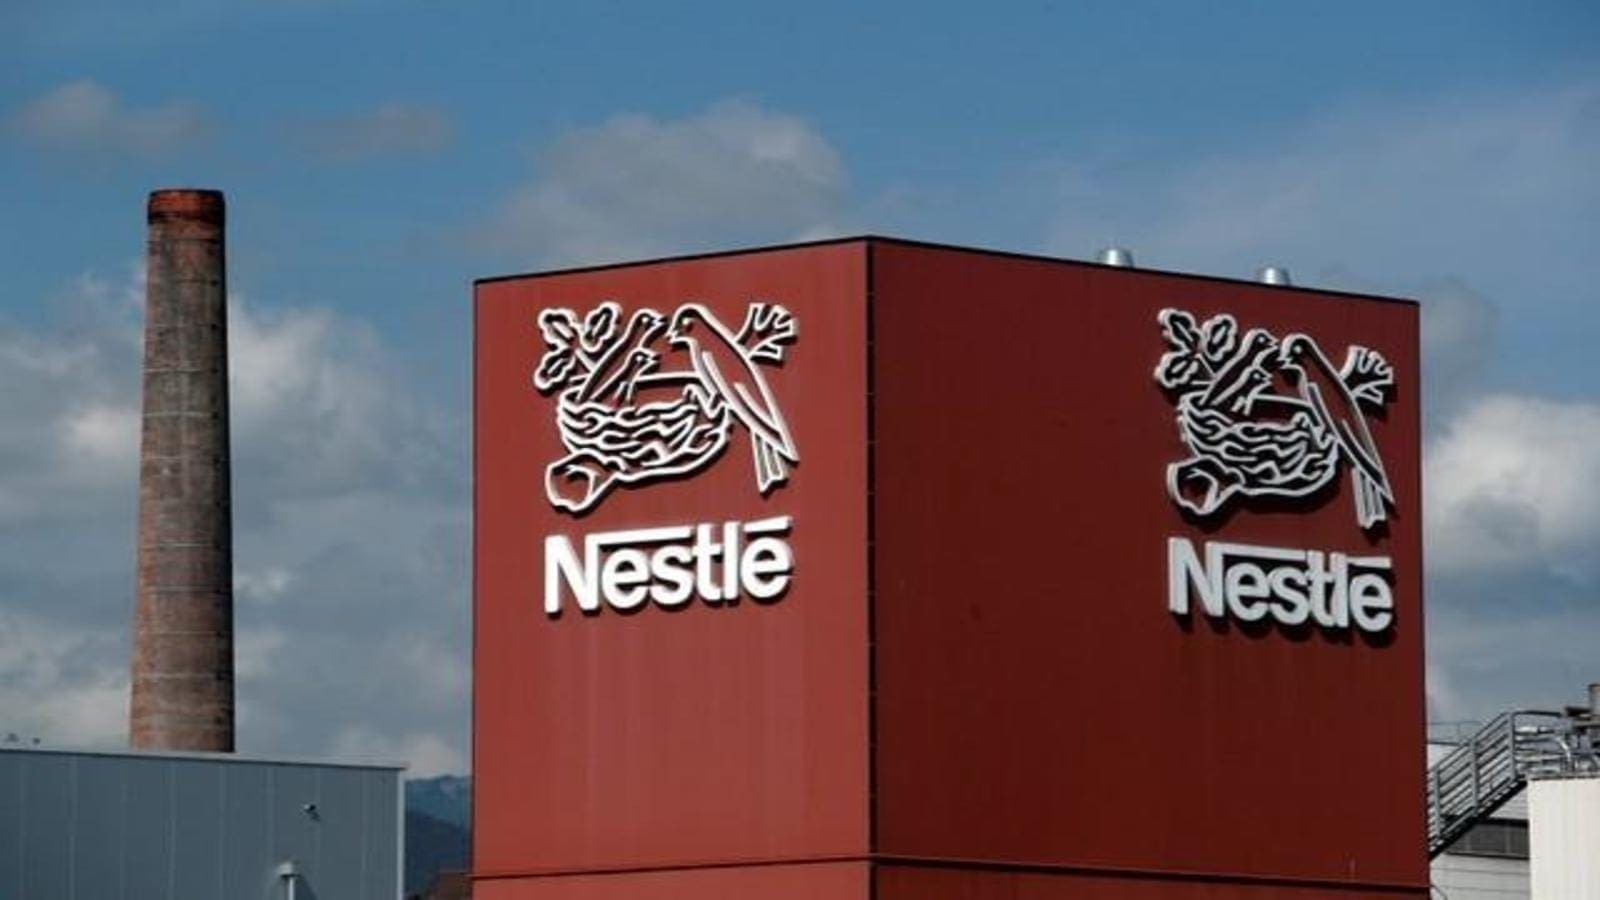 Nestlé to halt production at New Zealand facility, develops new sustainable packaging for confectionery in UK